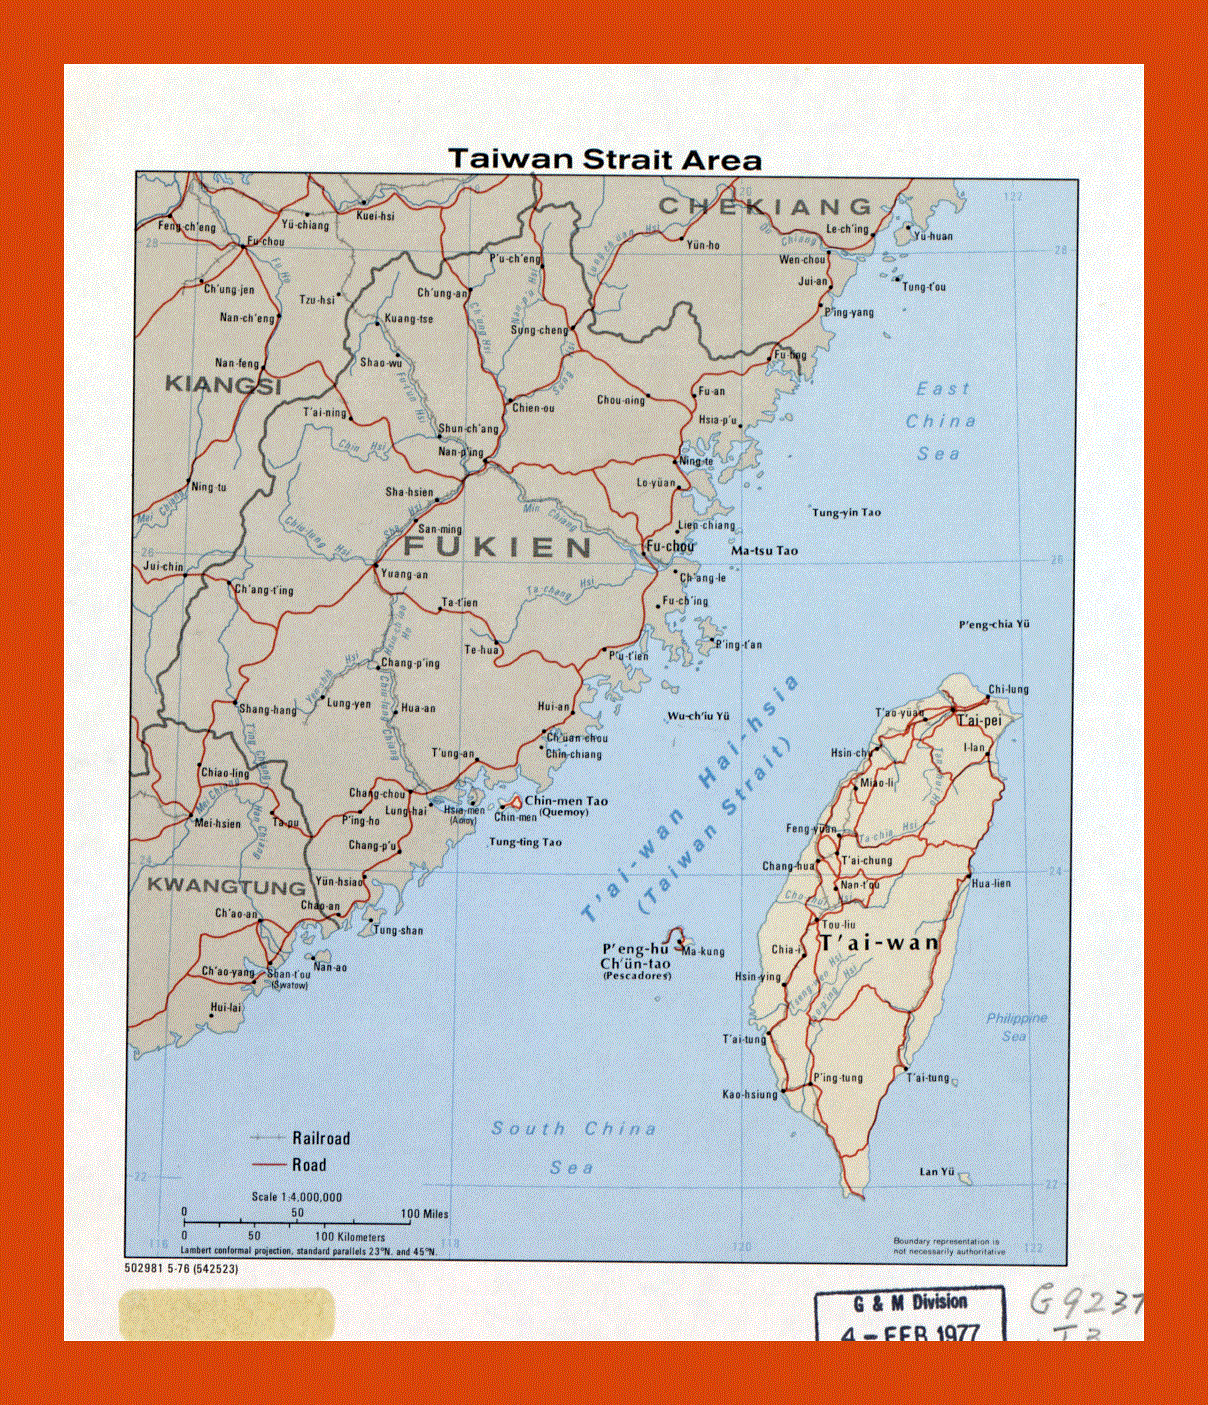 Map of Taiwan Strait Area - 1976